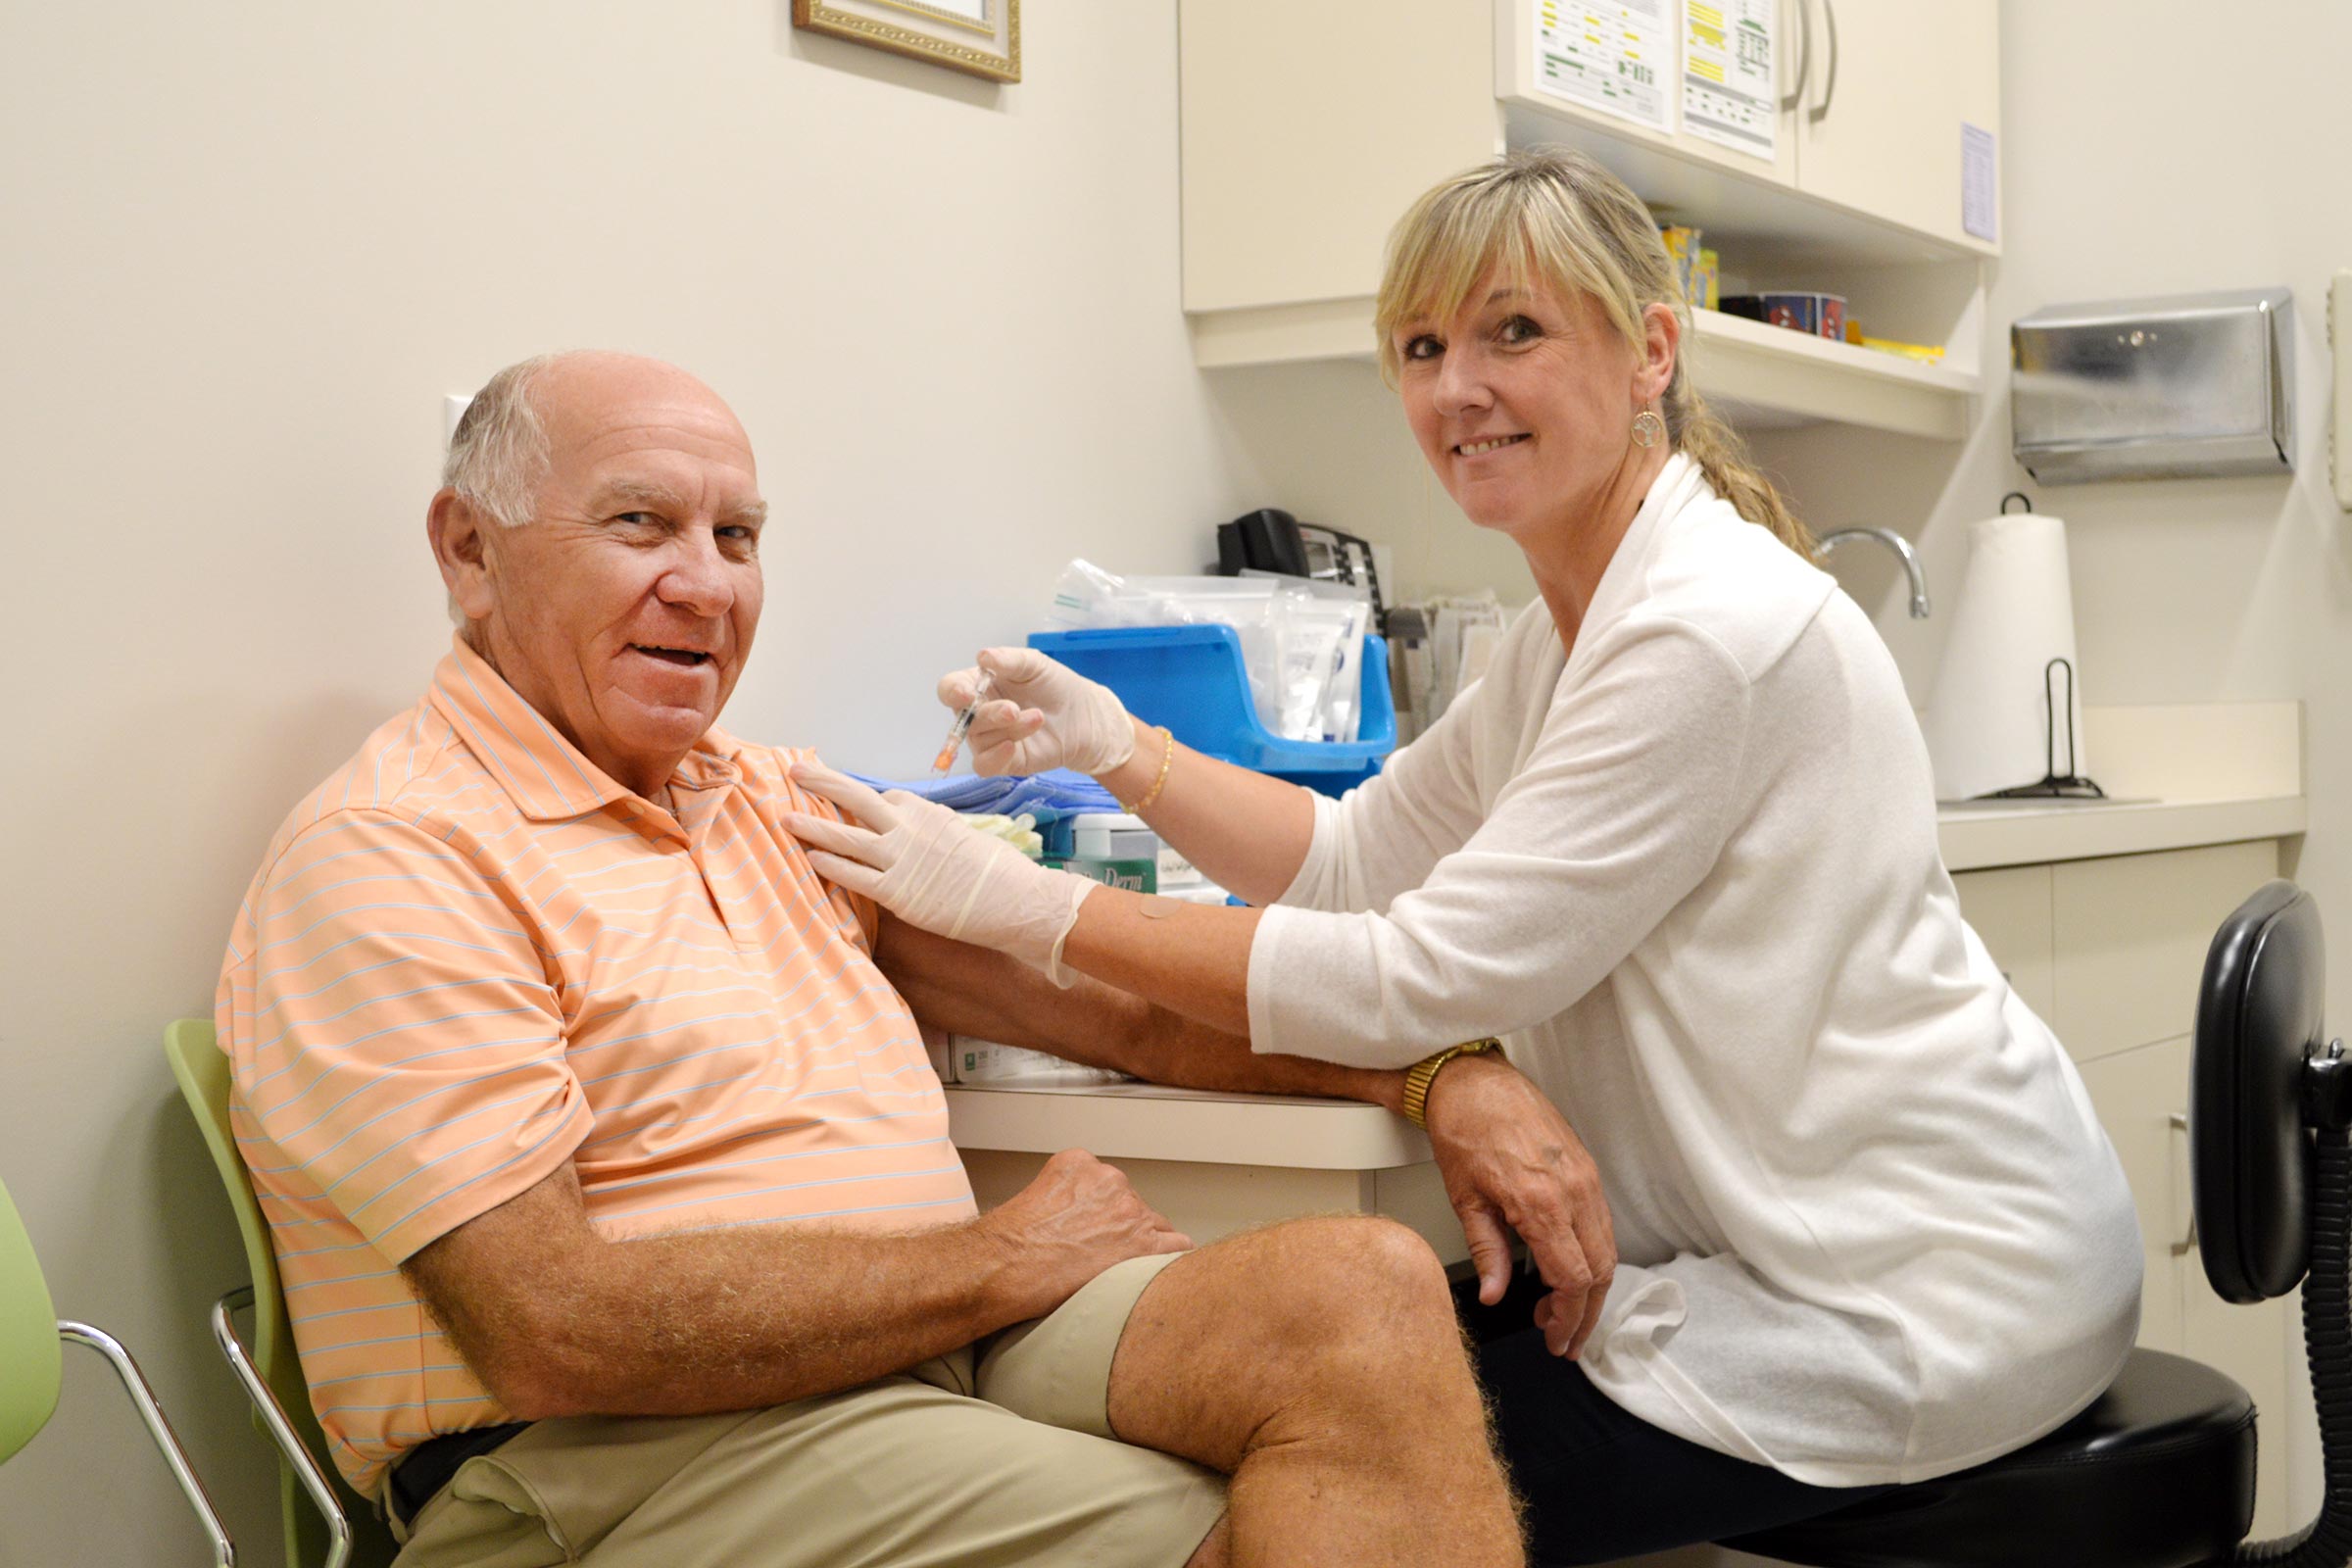 A middle aged man wearing a peach-colored shirt gets his flu shot from a blonde nurse wearing a white jacket